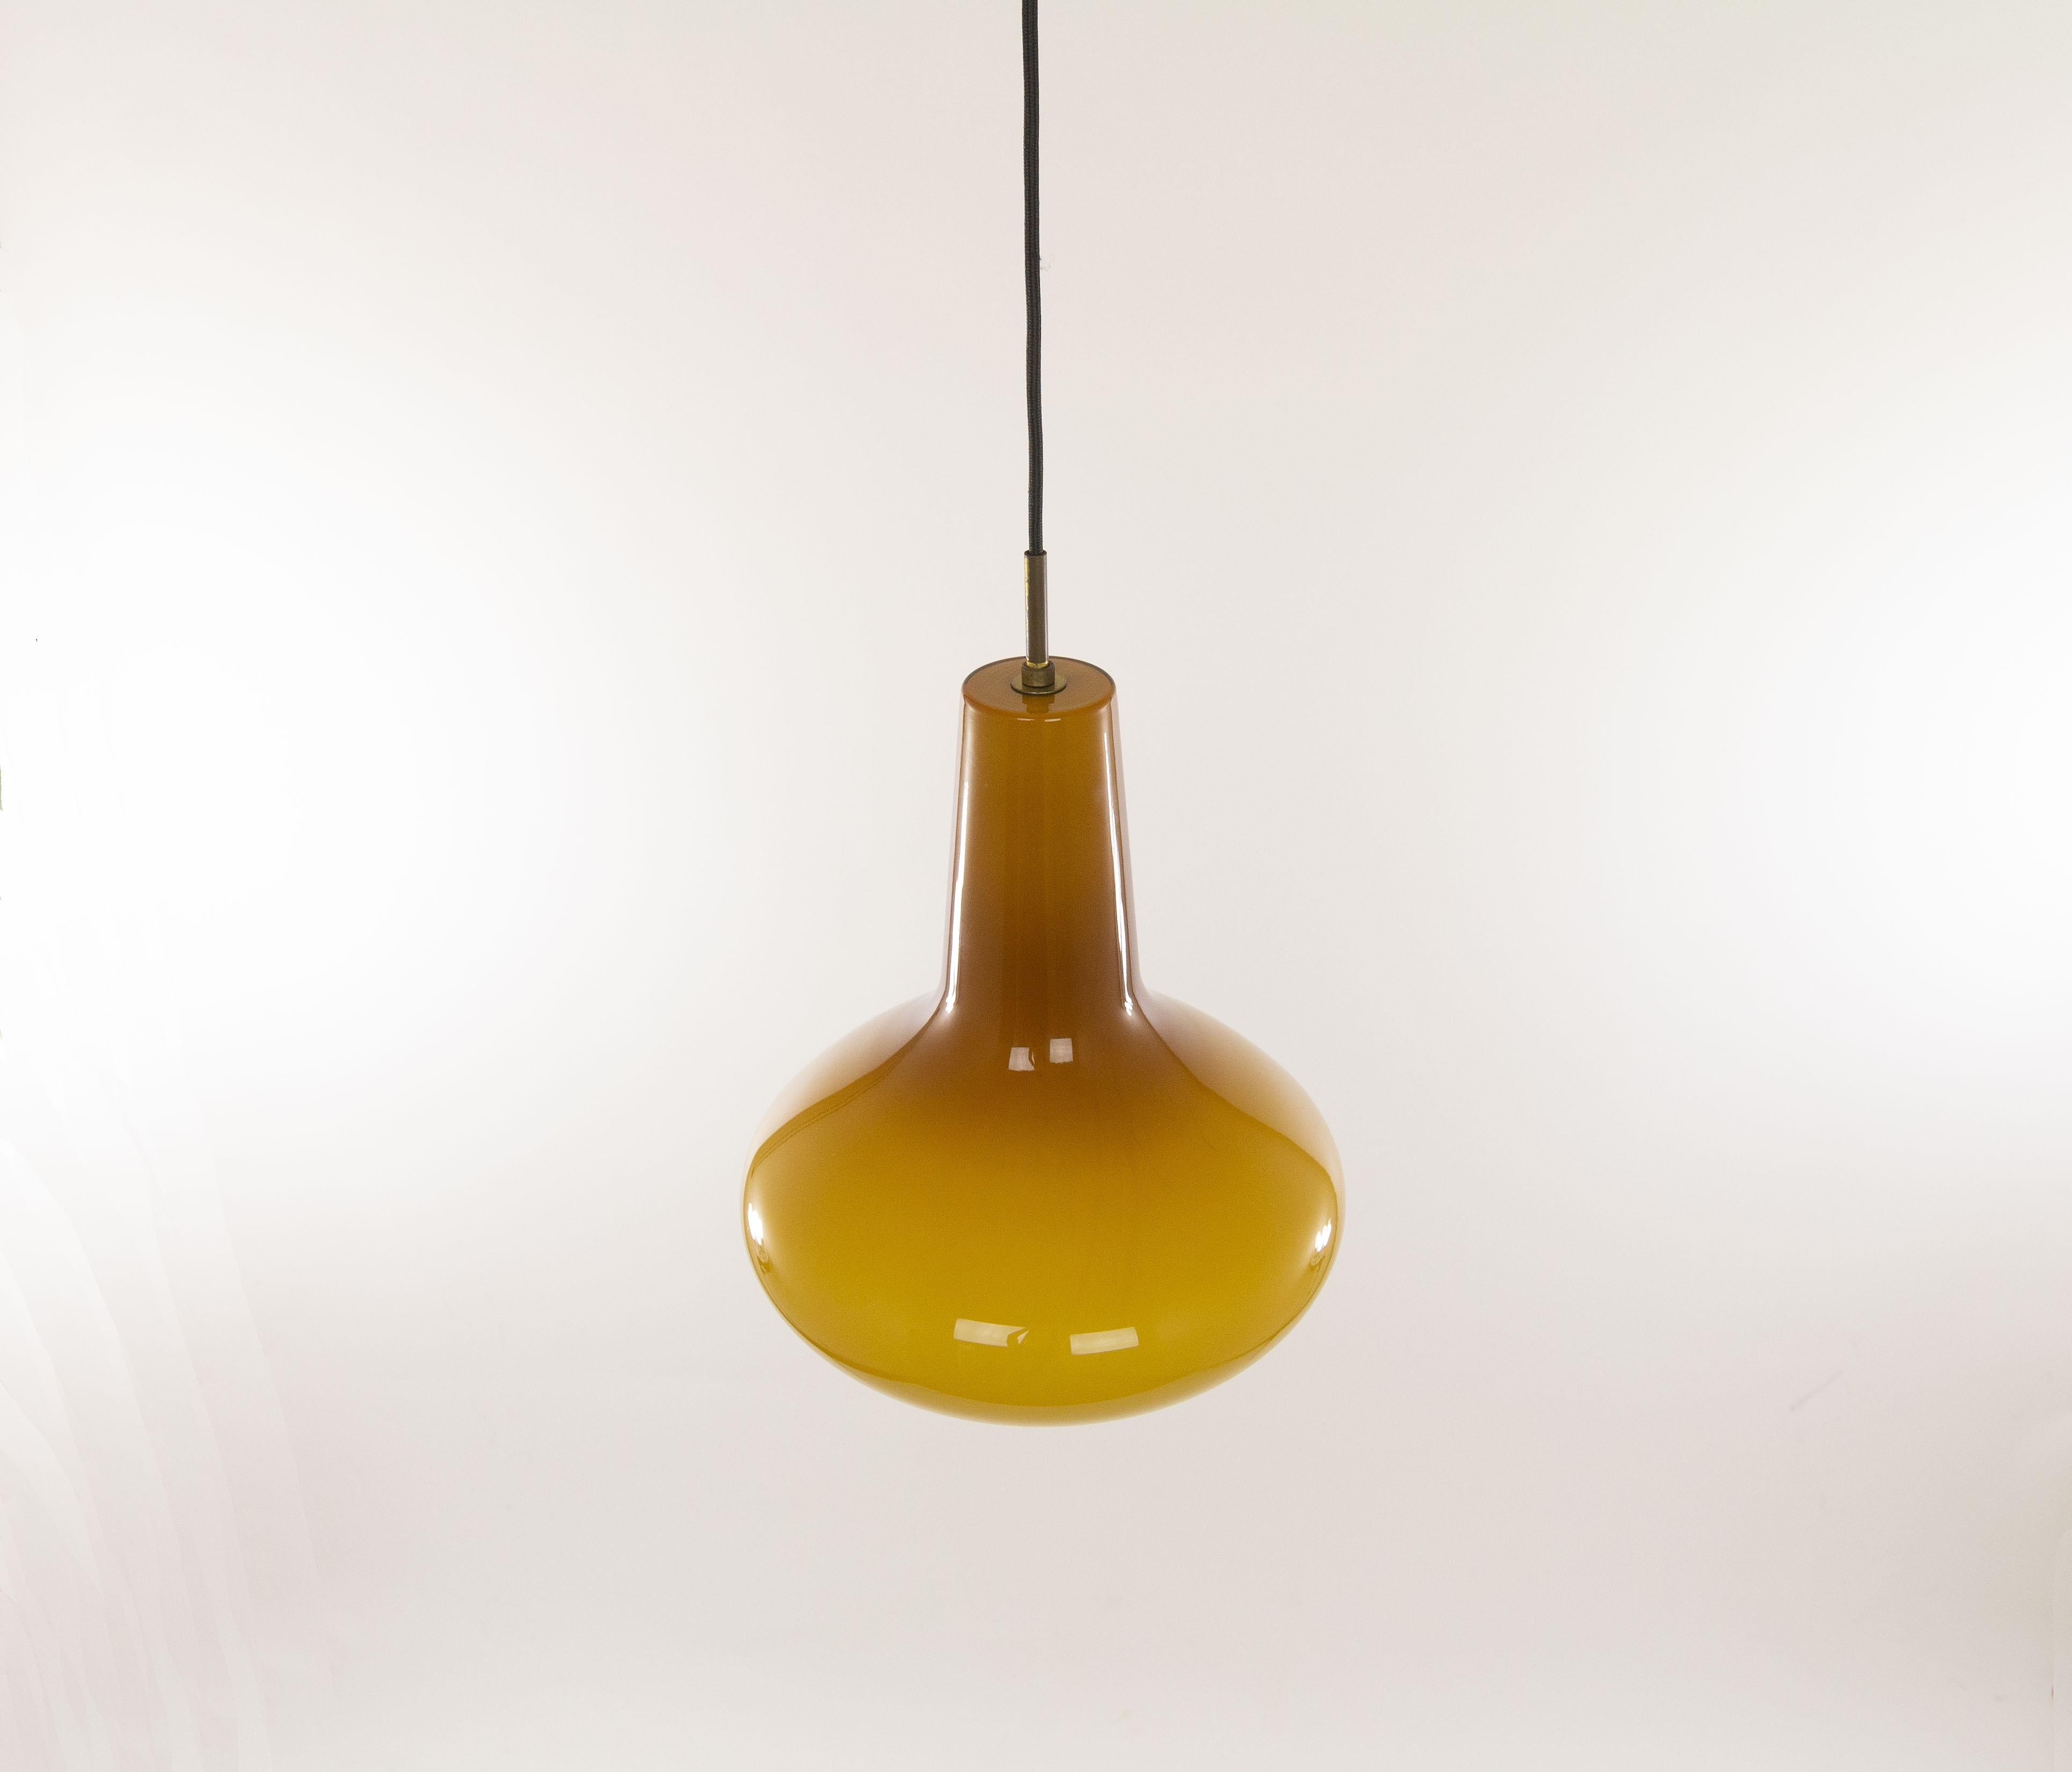 Stunning hand blown glass pendant No. 011.13 designed by Massimo Vignelli at the start of his impressive career in design and executed by Murano glass specialist Venini. One of the most special lamps that Vignelli designed for Venini.

Original